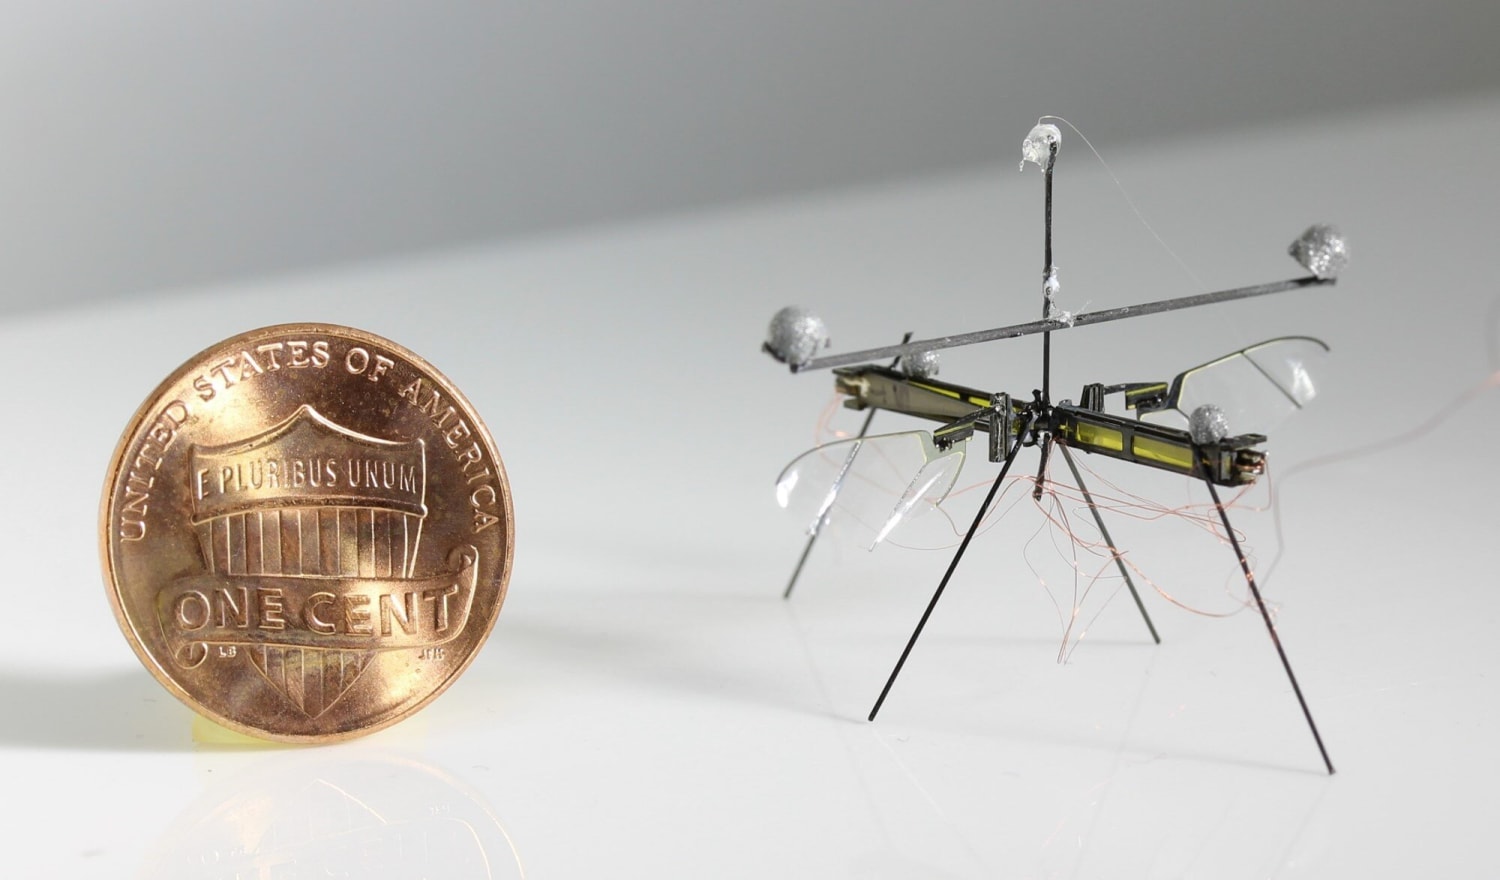 Best of Last Week: RoboFly, a nighttime photovoltaic cell, and how roses improve learning during sleep